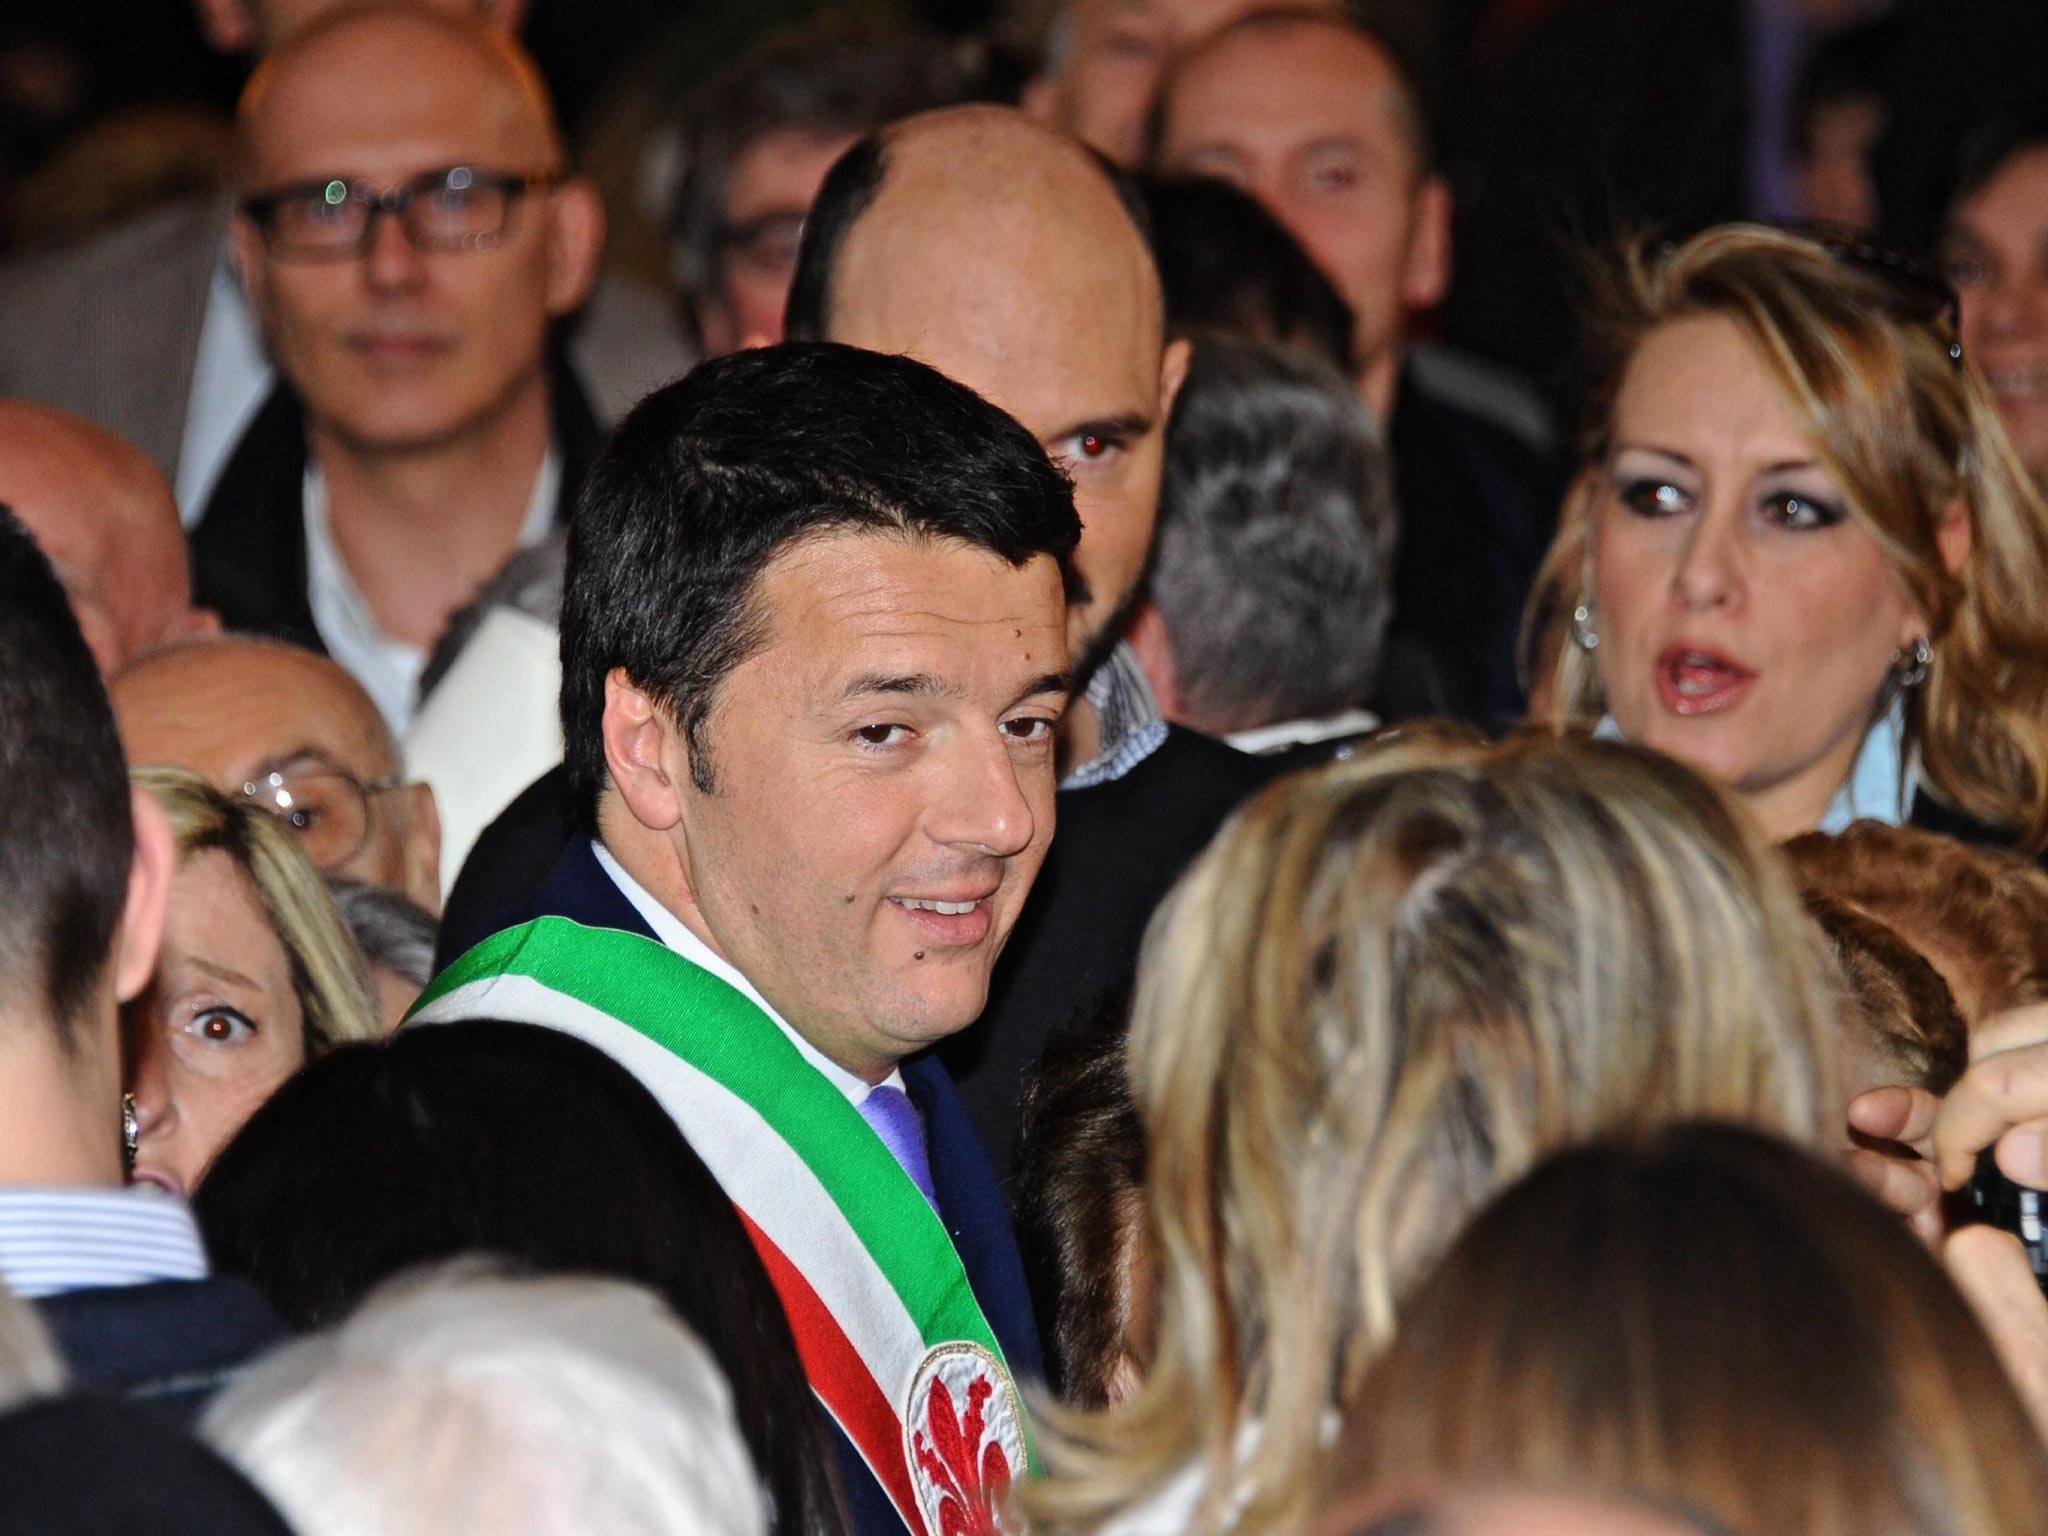 Democratic Party (PD) leader and Florence Mayor, Matteo Renzi (centre) smiles during a ceremony at the Palazzo Vecchio in Florence